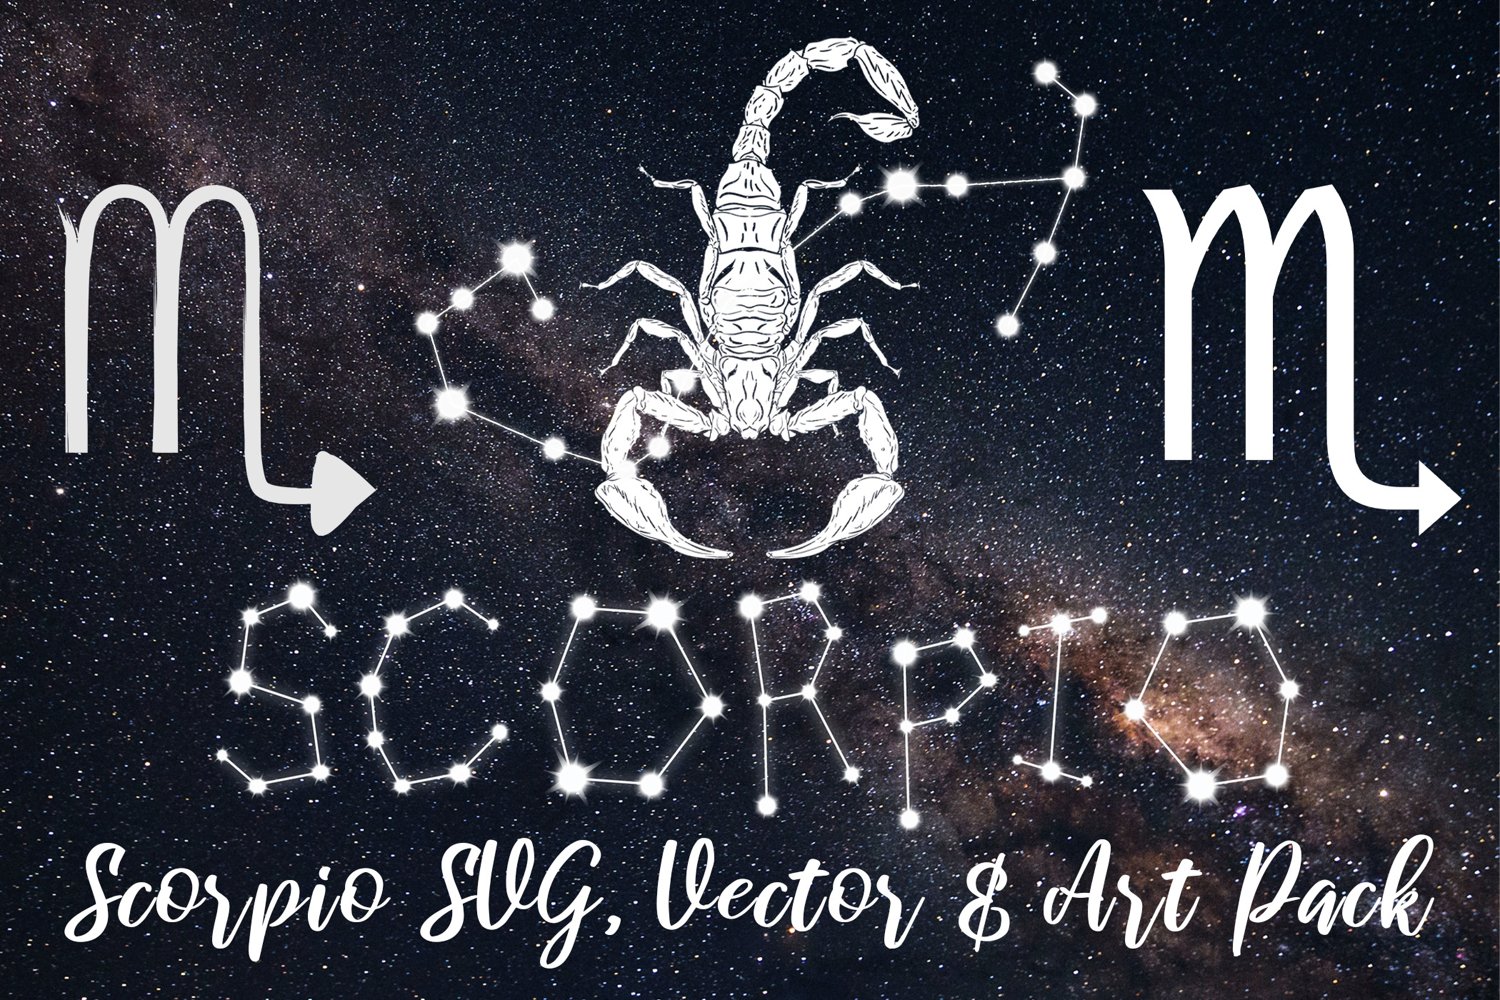 Zodiac sign with a scorpion on it.